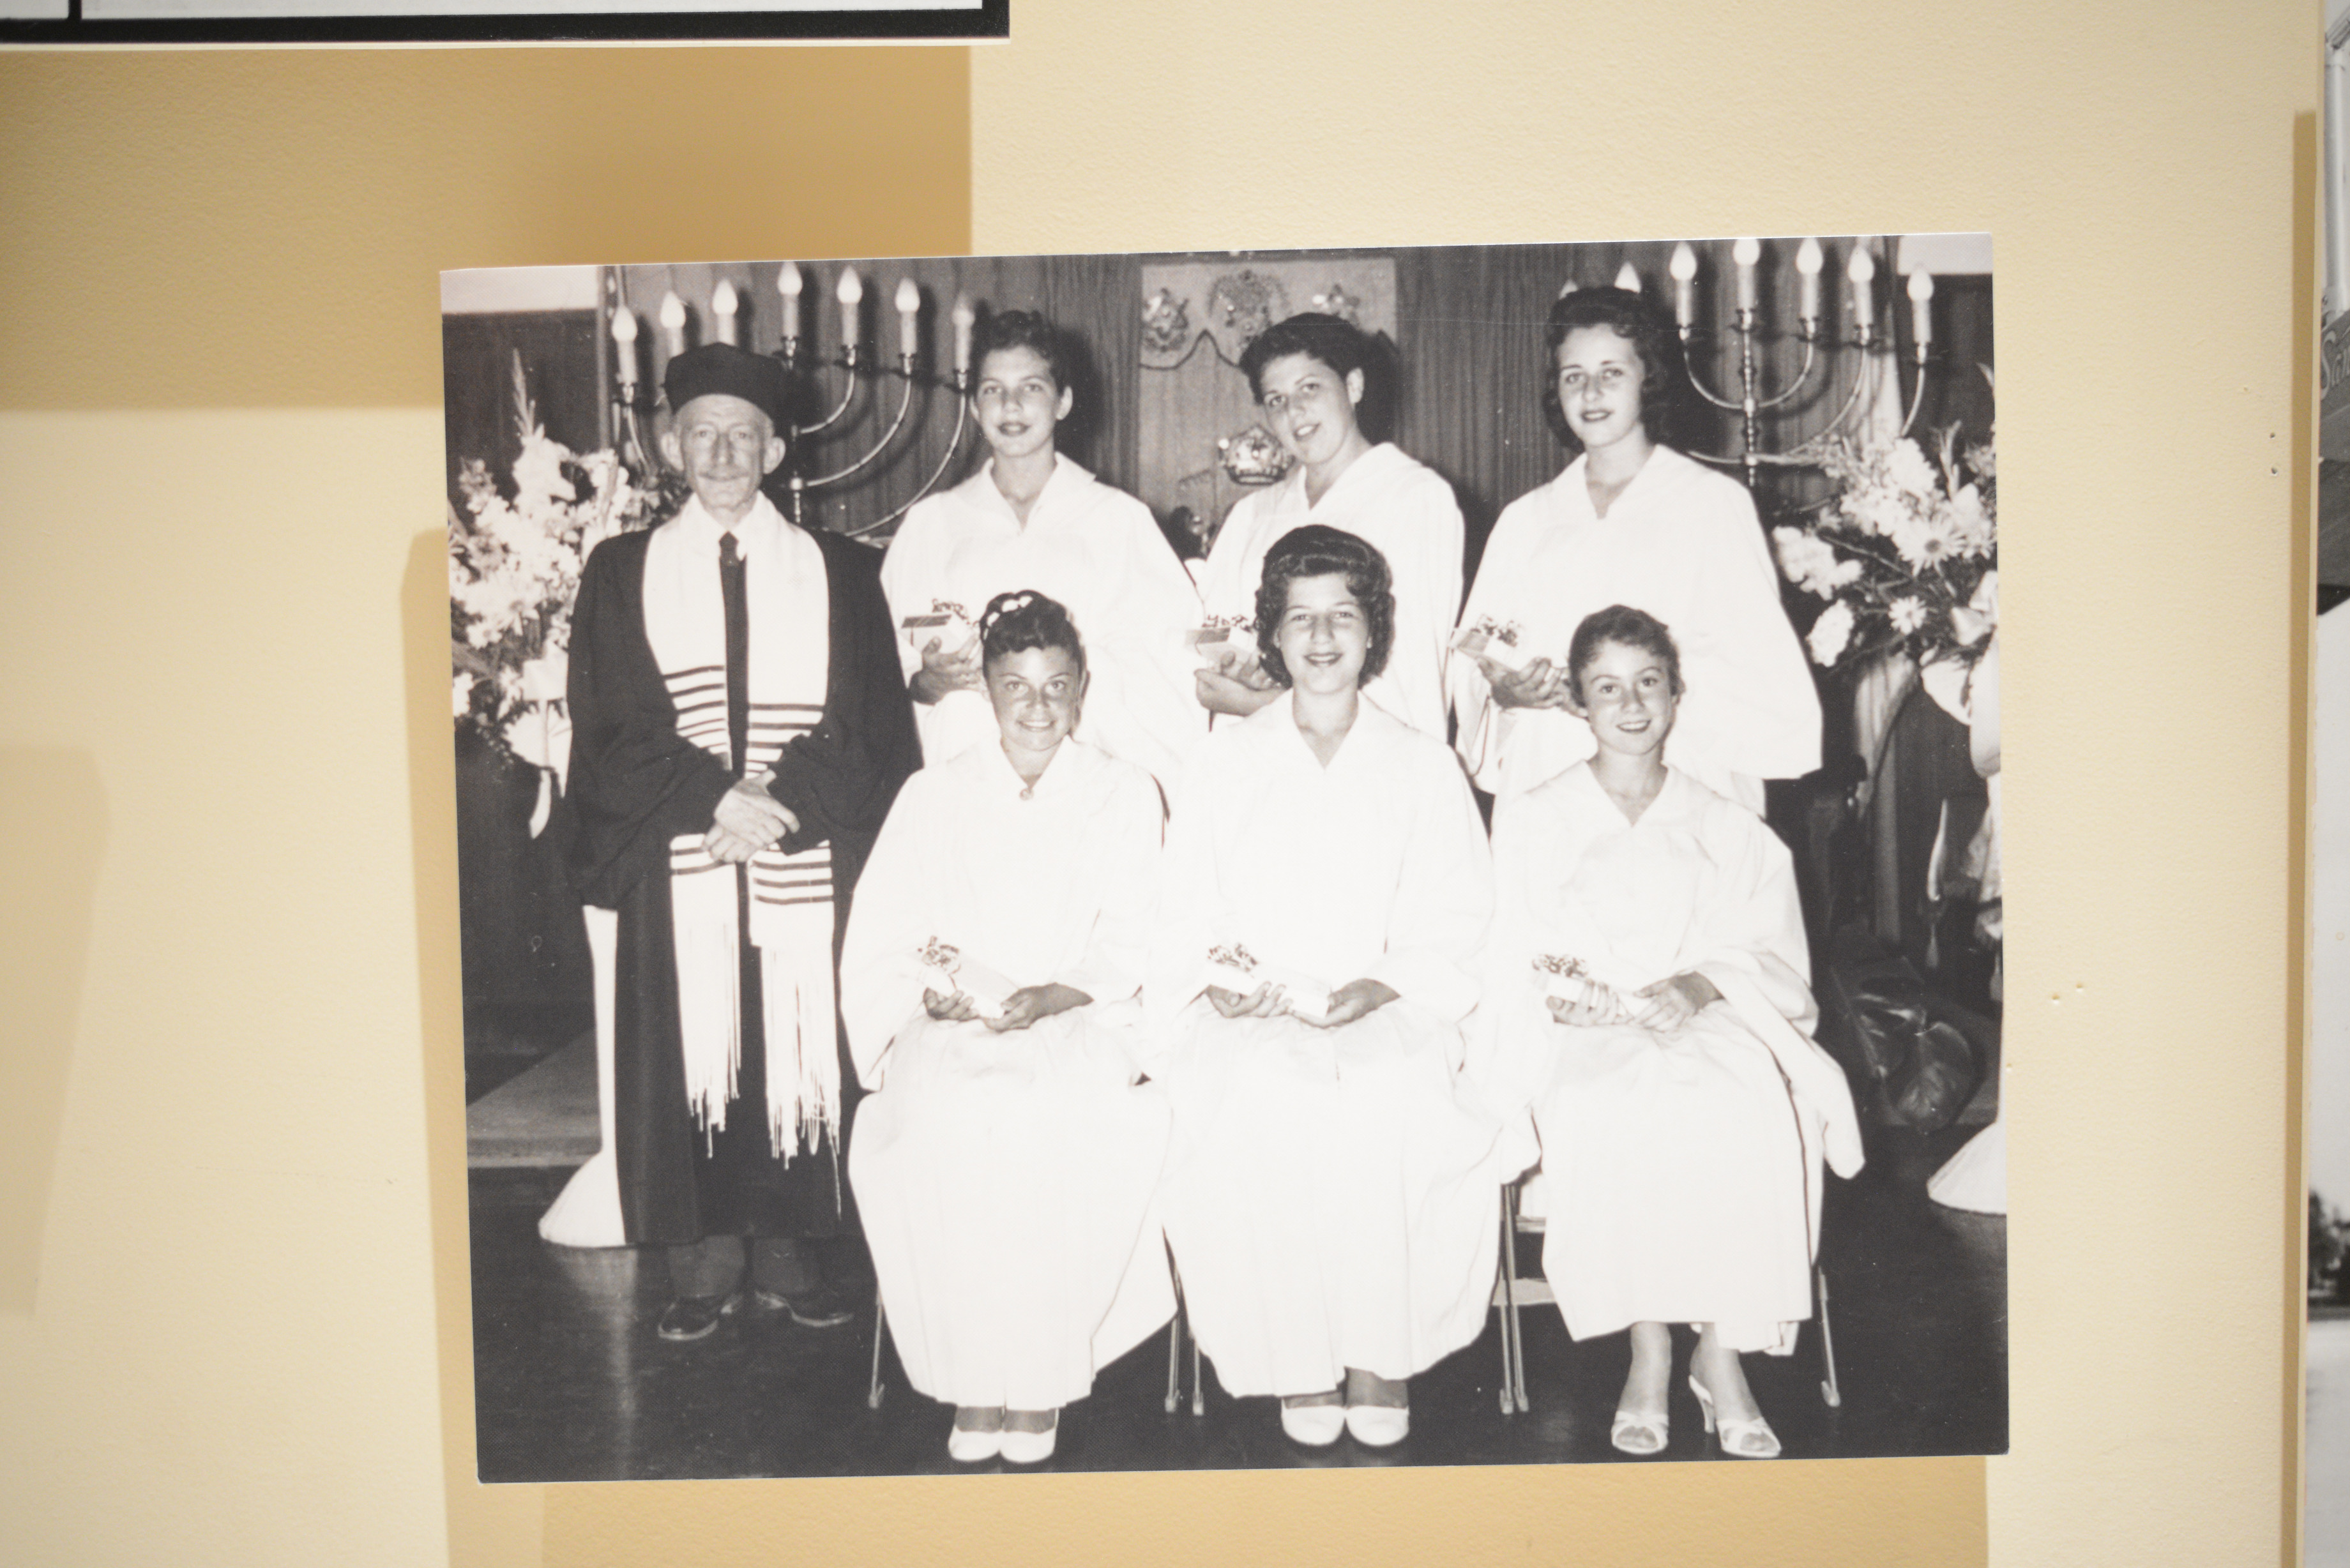 Photograph of a group of young women and rabbi